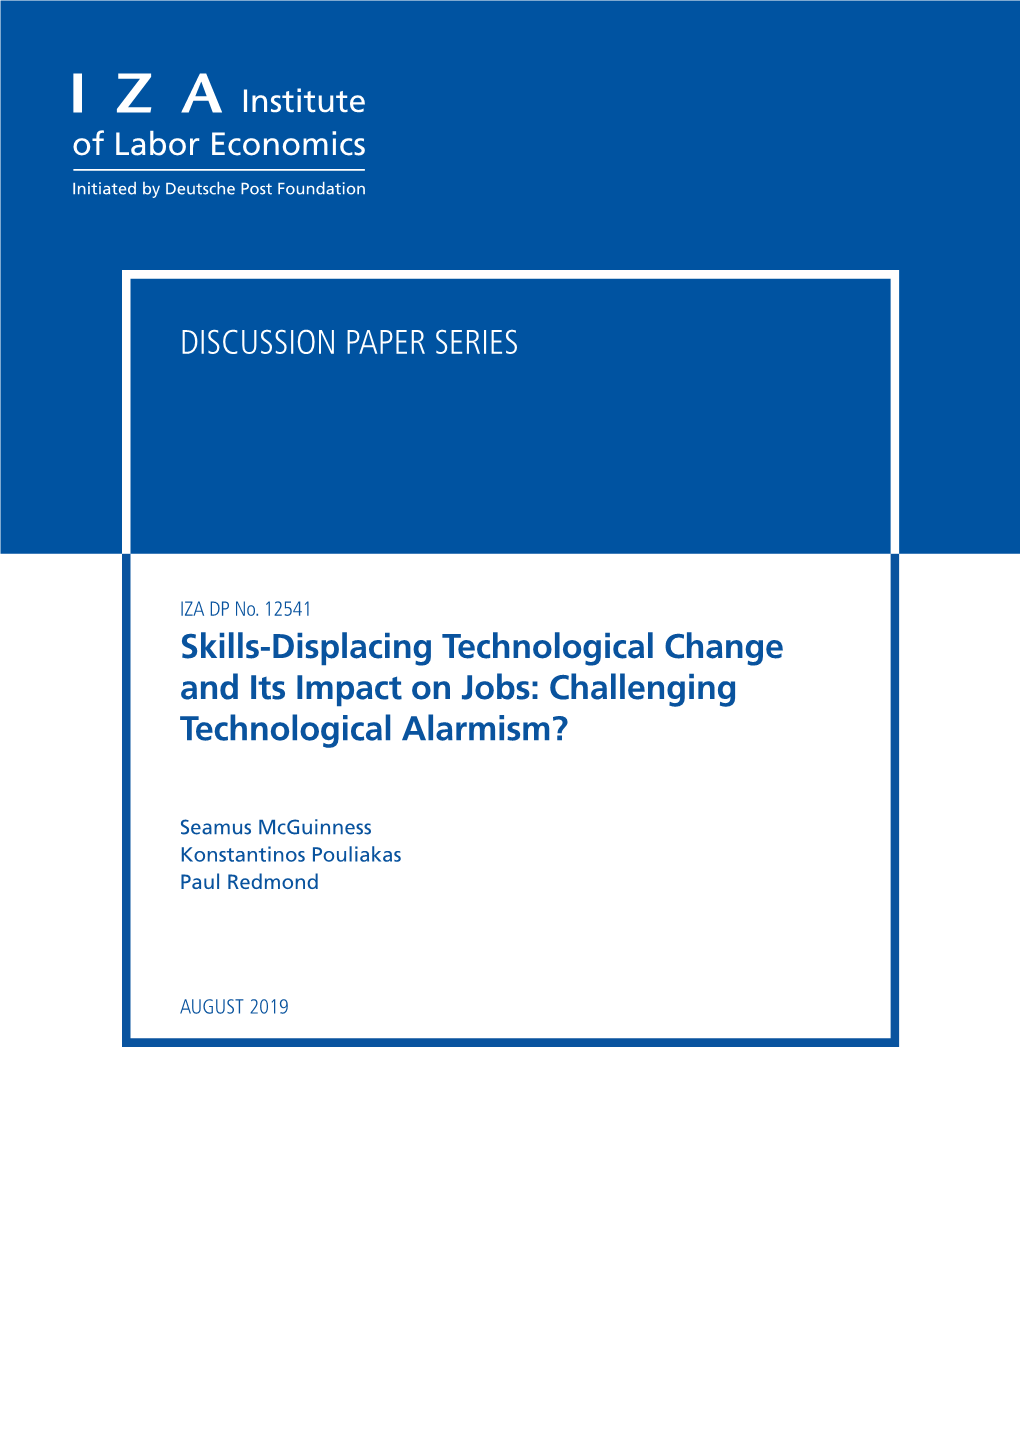 Skills-Displacing Technological Change and Its Impact on Jobs: Challenging Technological Alarmism?